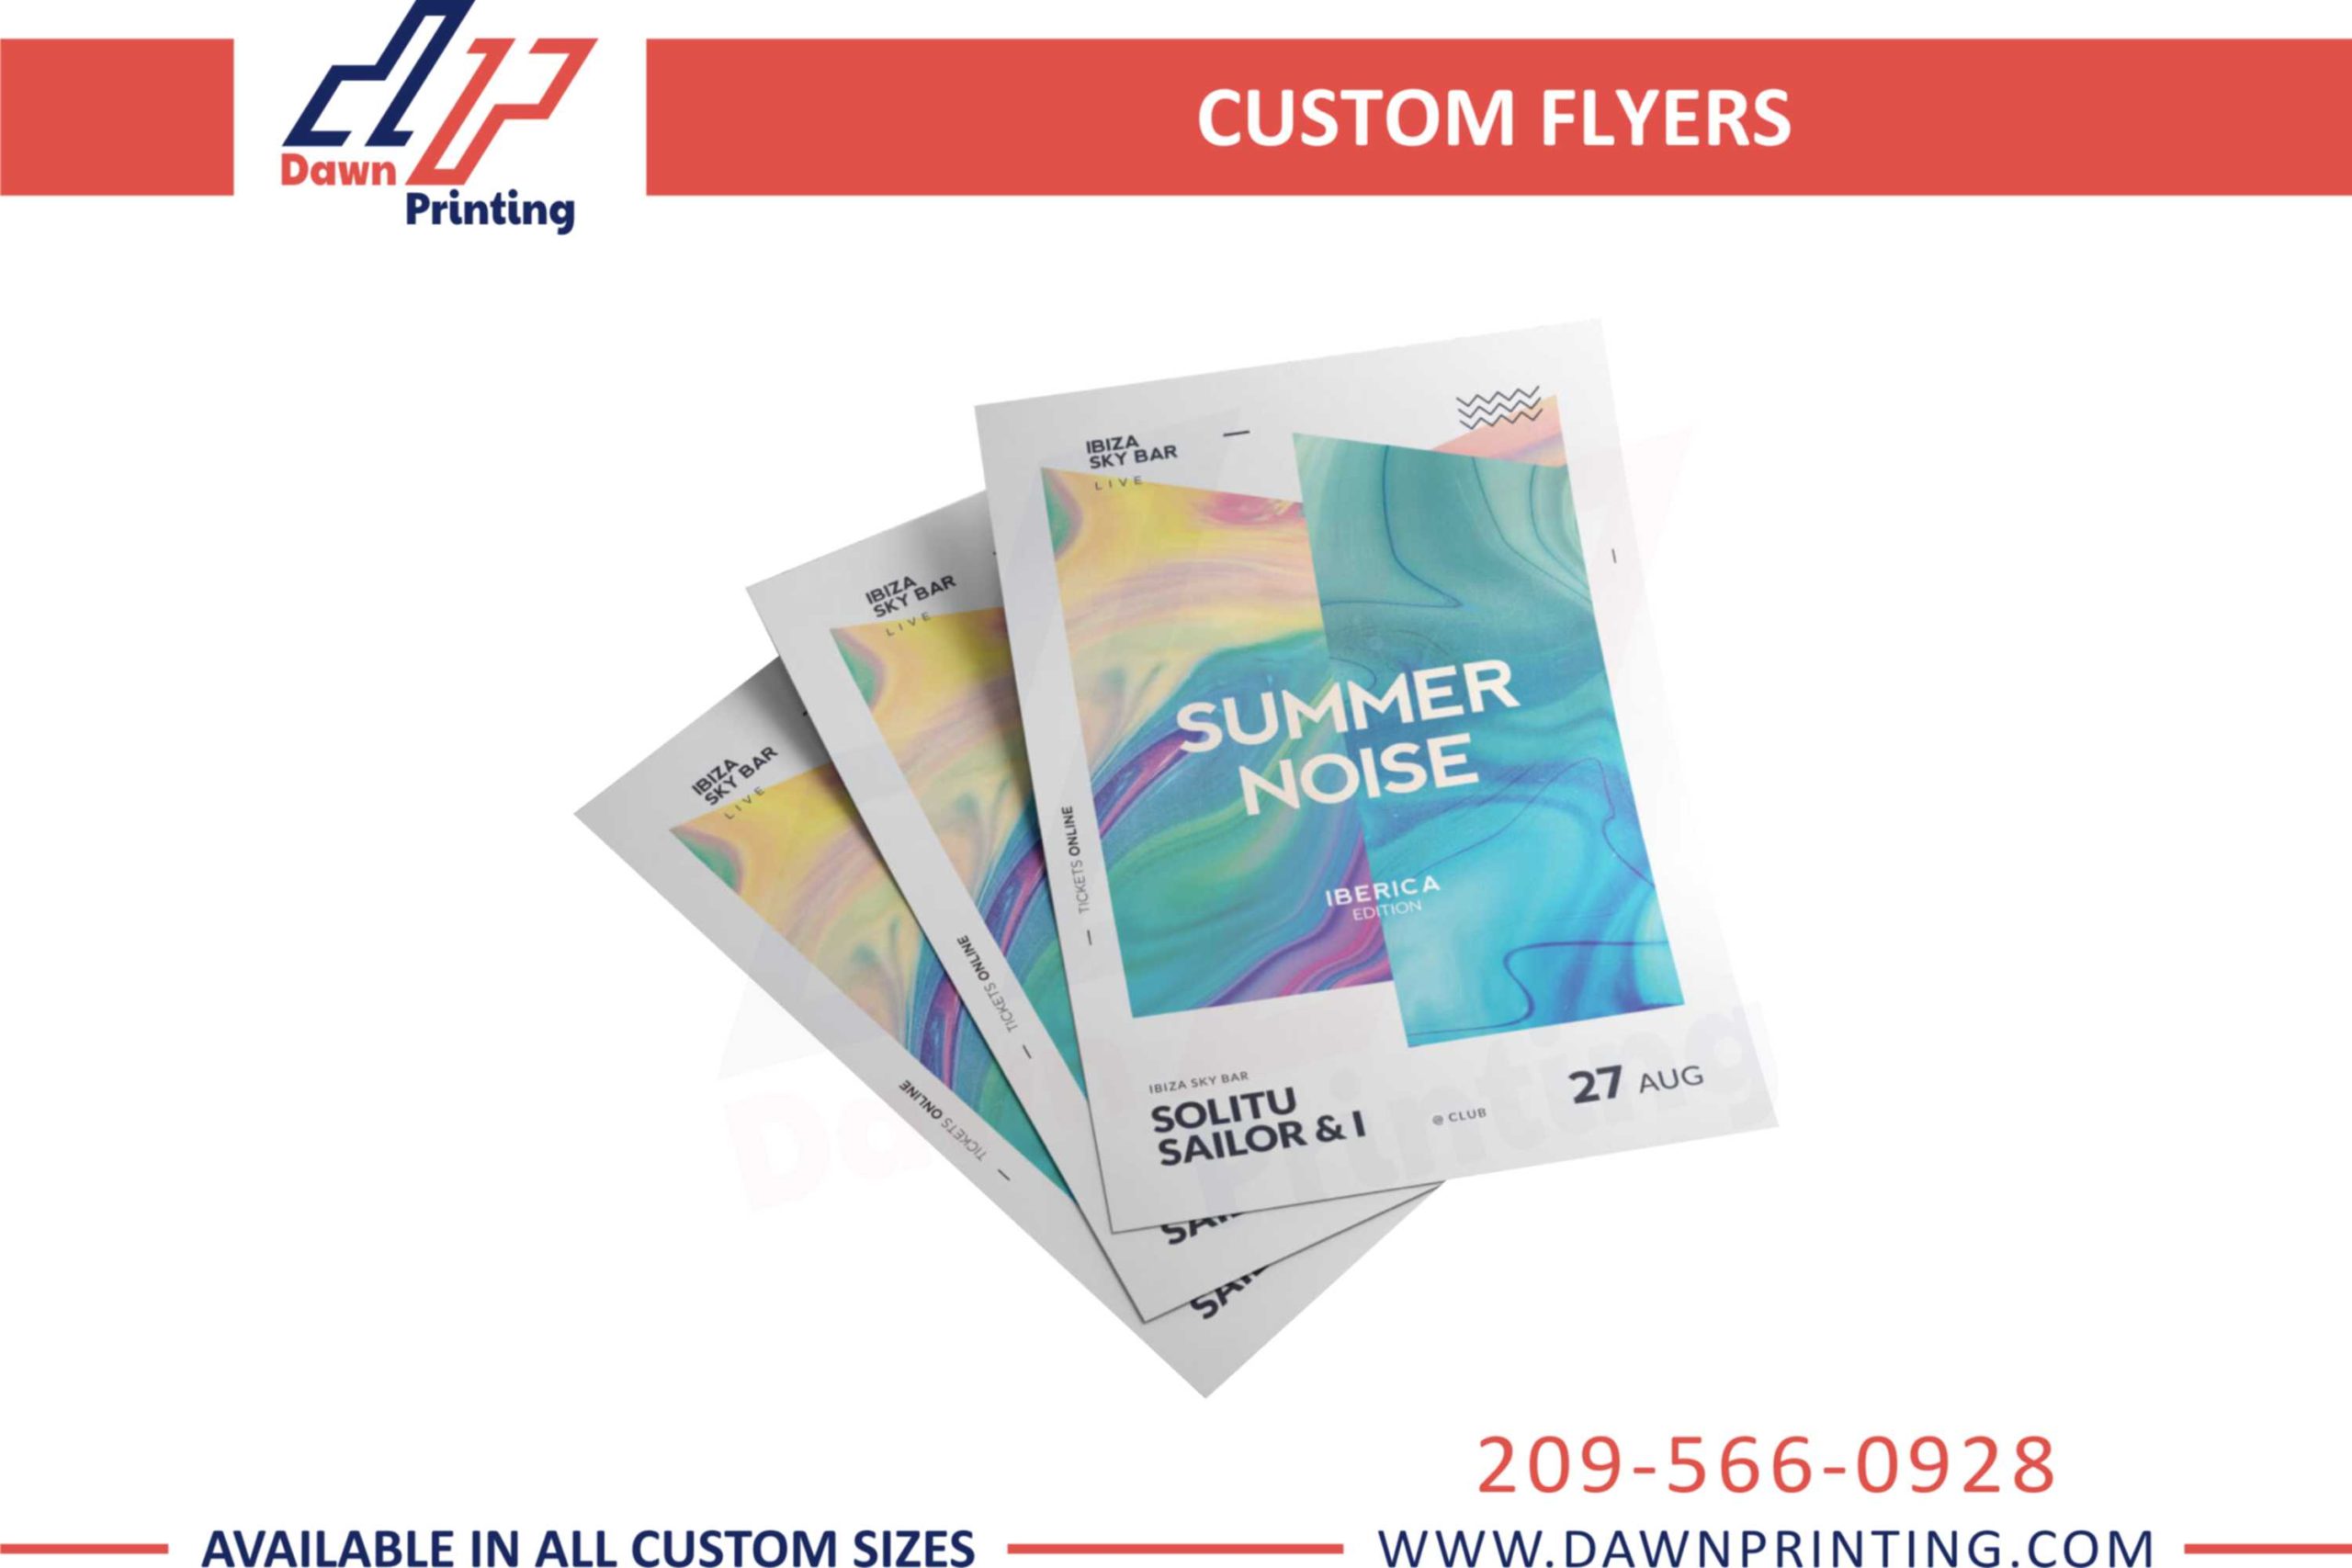 Wholesale Customized Flyers - Dawn Printing